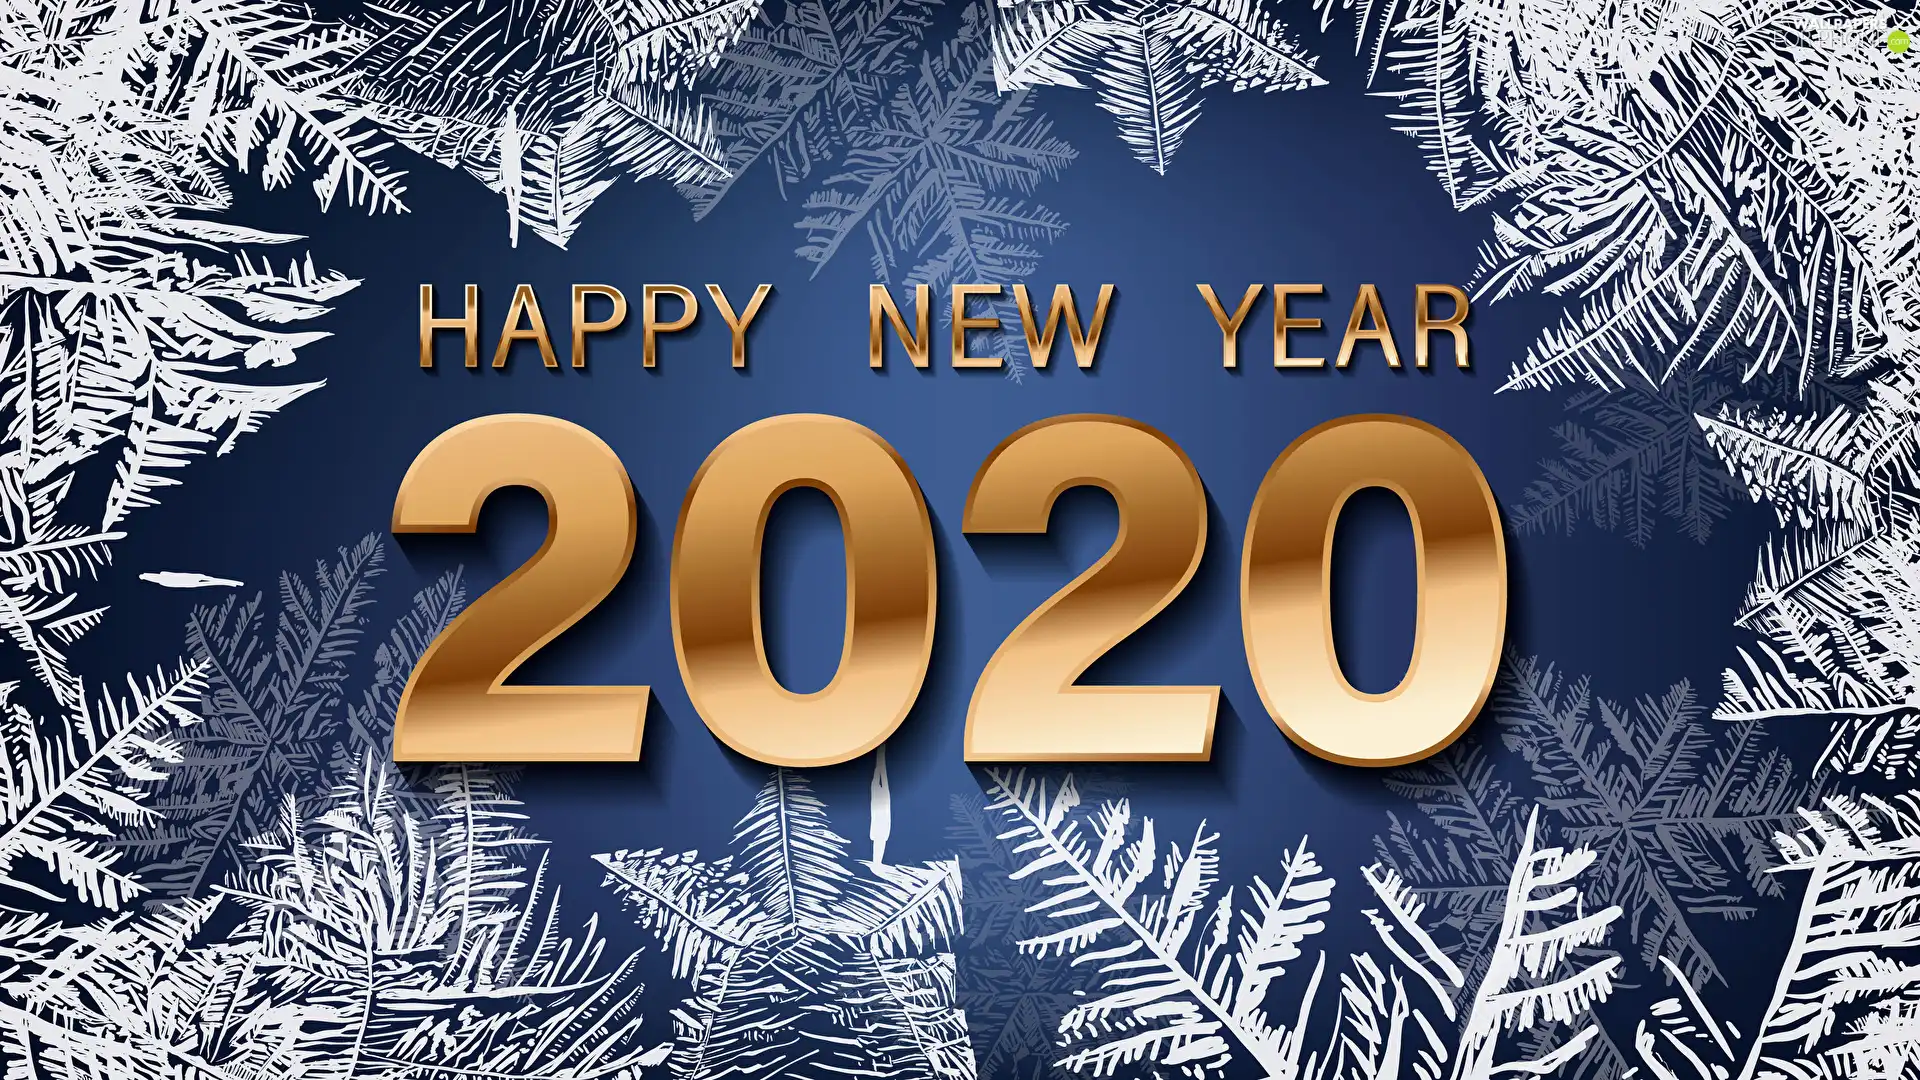 numbers, New Year, happy new year, graphics, text, 2020